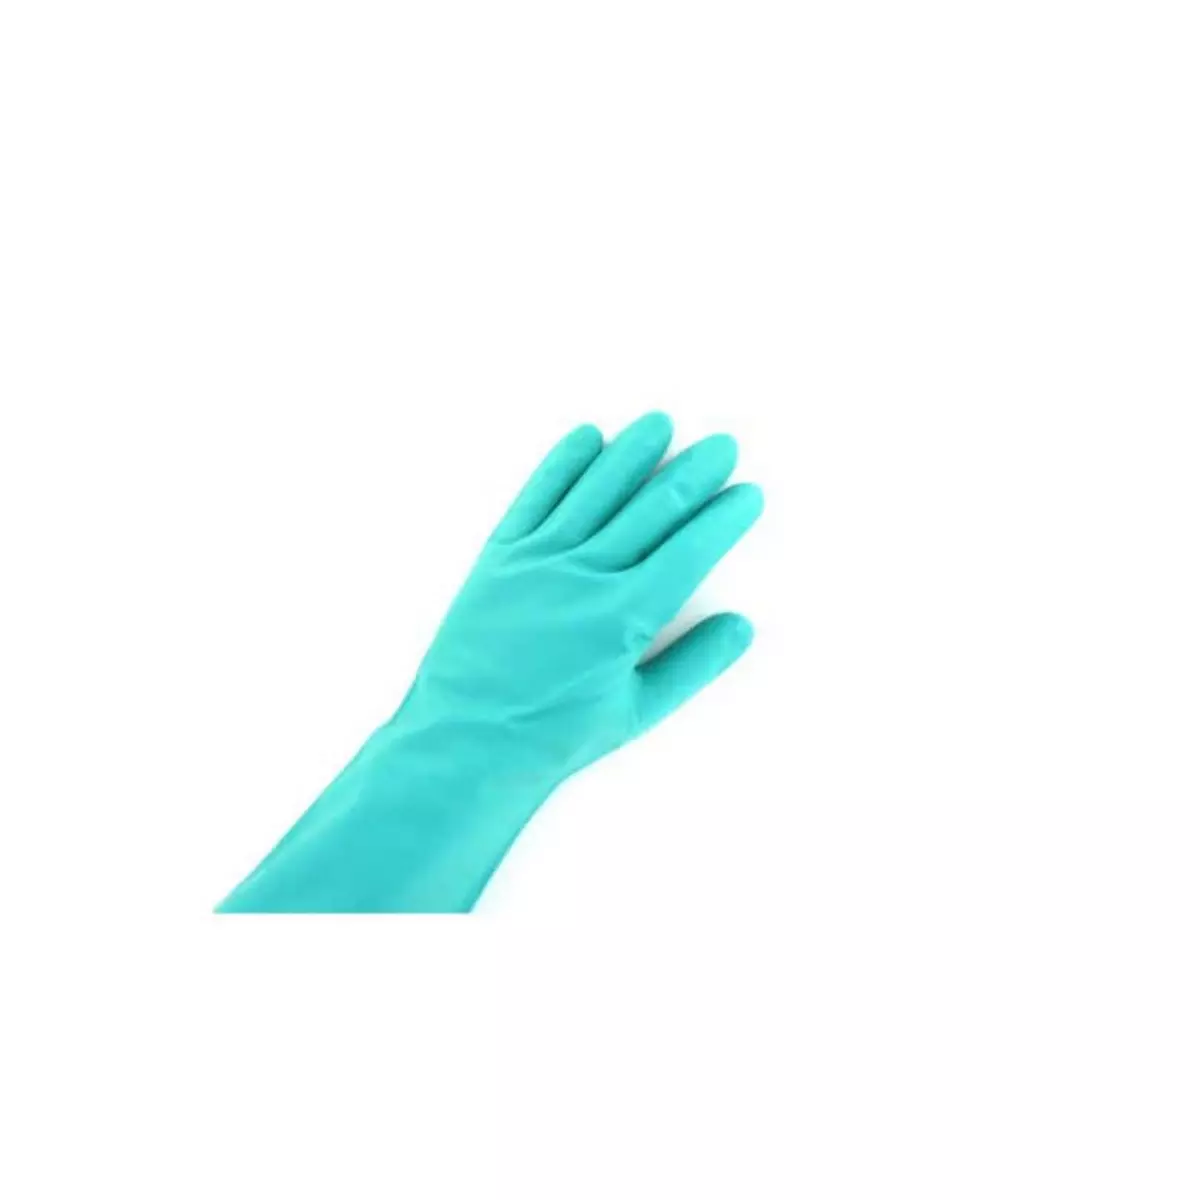 EURO PROTECTION Gants Nitrile vert Taille M/8 EP 5528